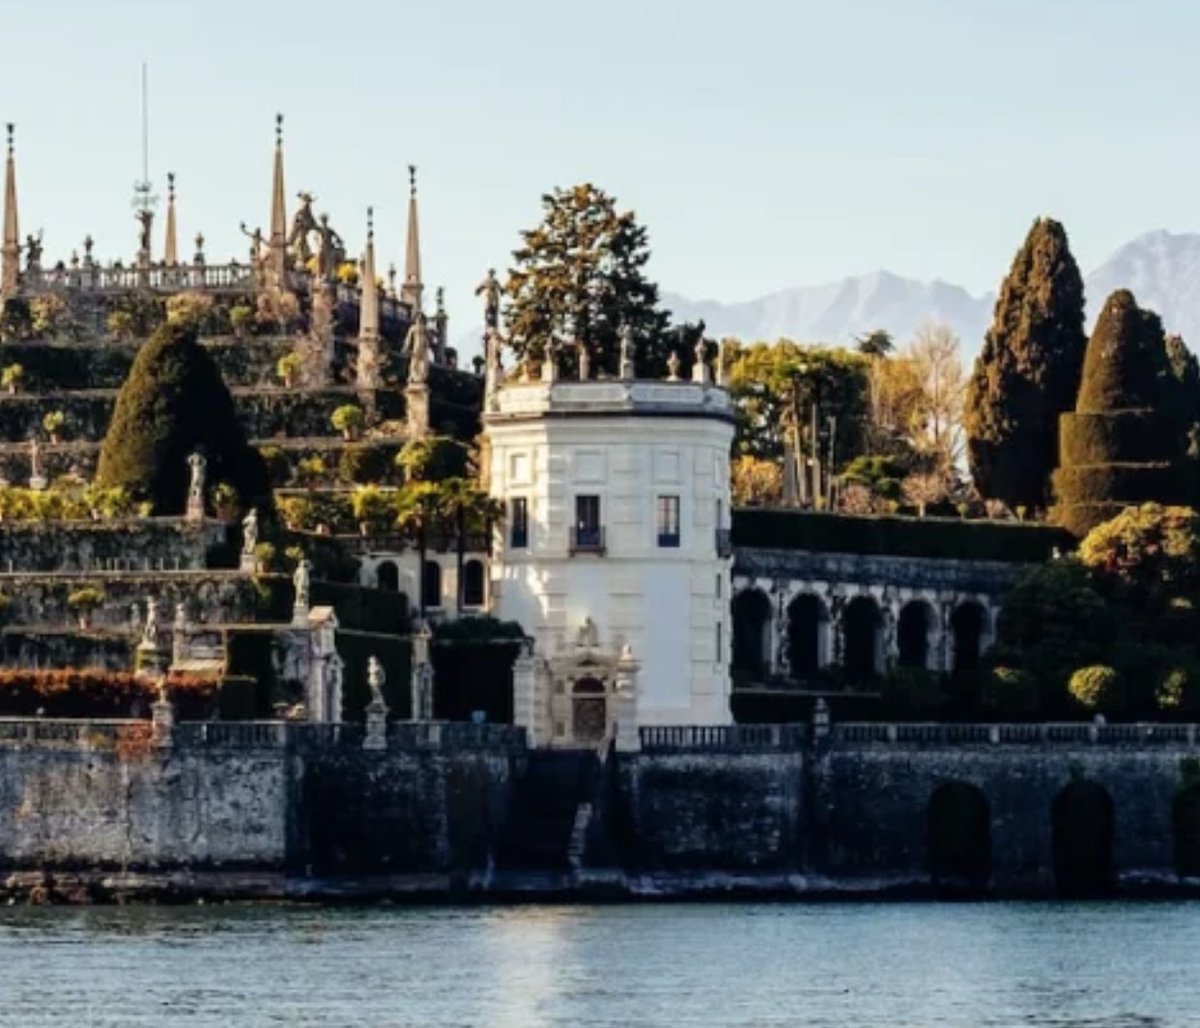 Be swept away on a 7-day journey of Northern Italy’s legendary lakes and historic cities. Experience the panoramic allure, bask in the romantic history, sip wine in its birthplace, and unwind by the sparkling water.  

tinyurl.com/northern-lakes…

#ItalyLakes #NorthernItaly